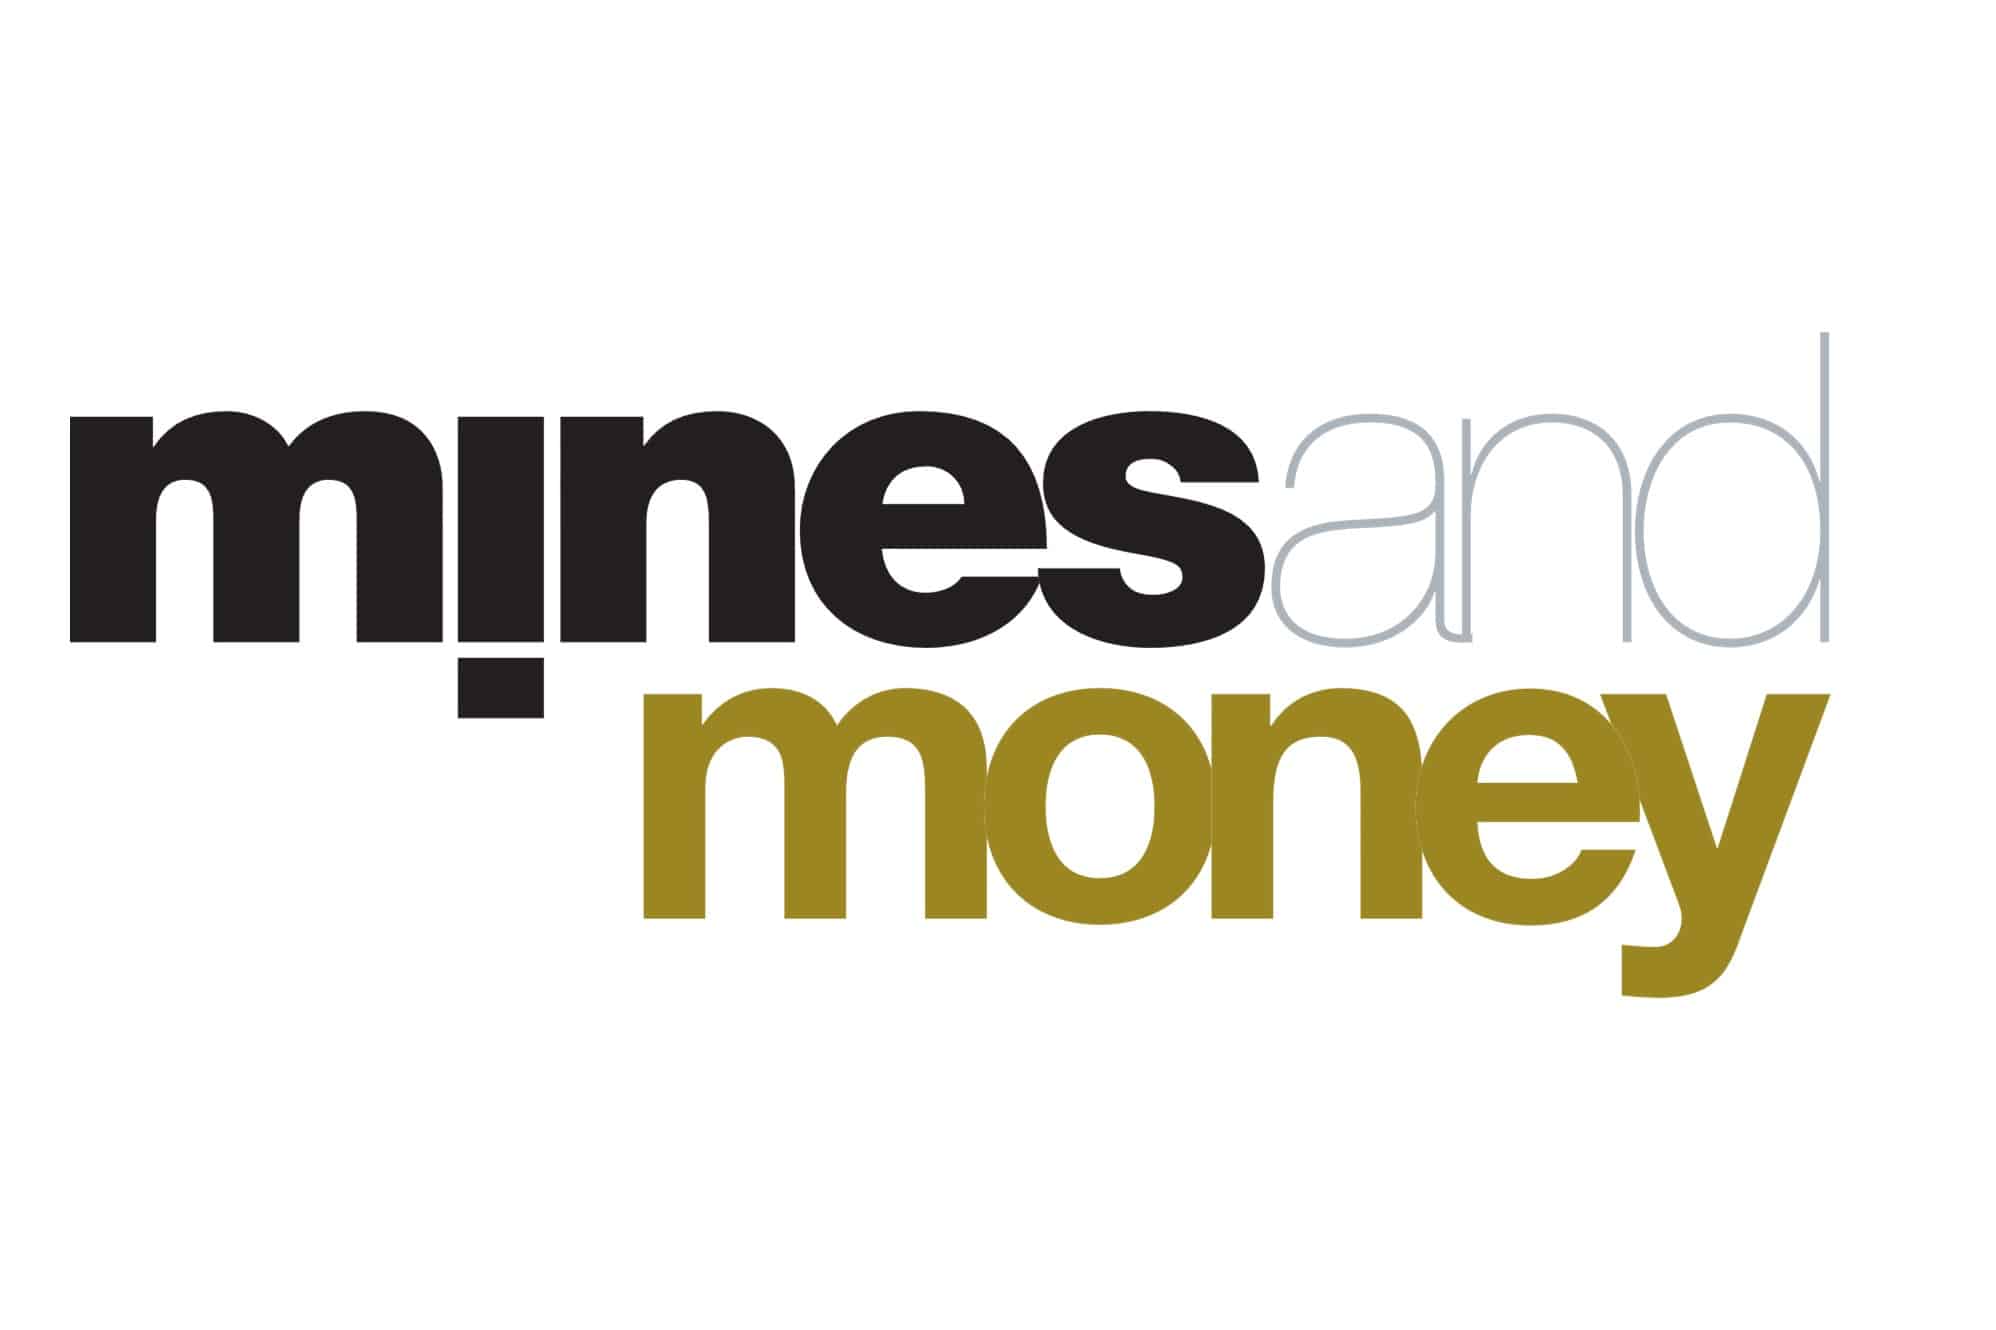 promo logo from Mines and money event